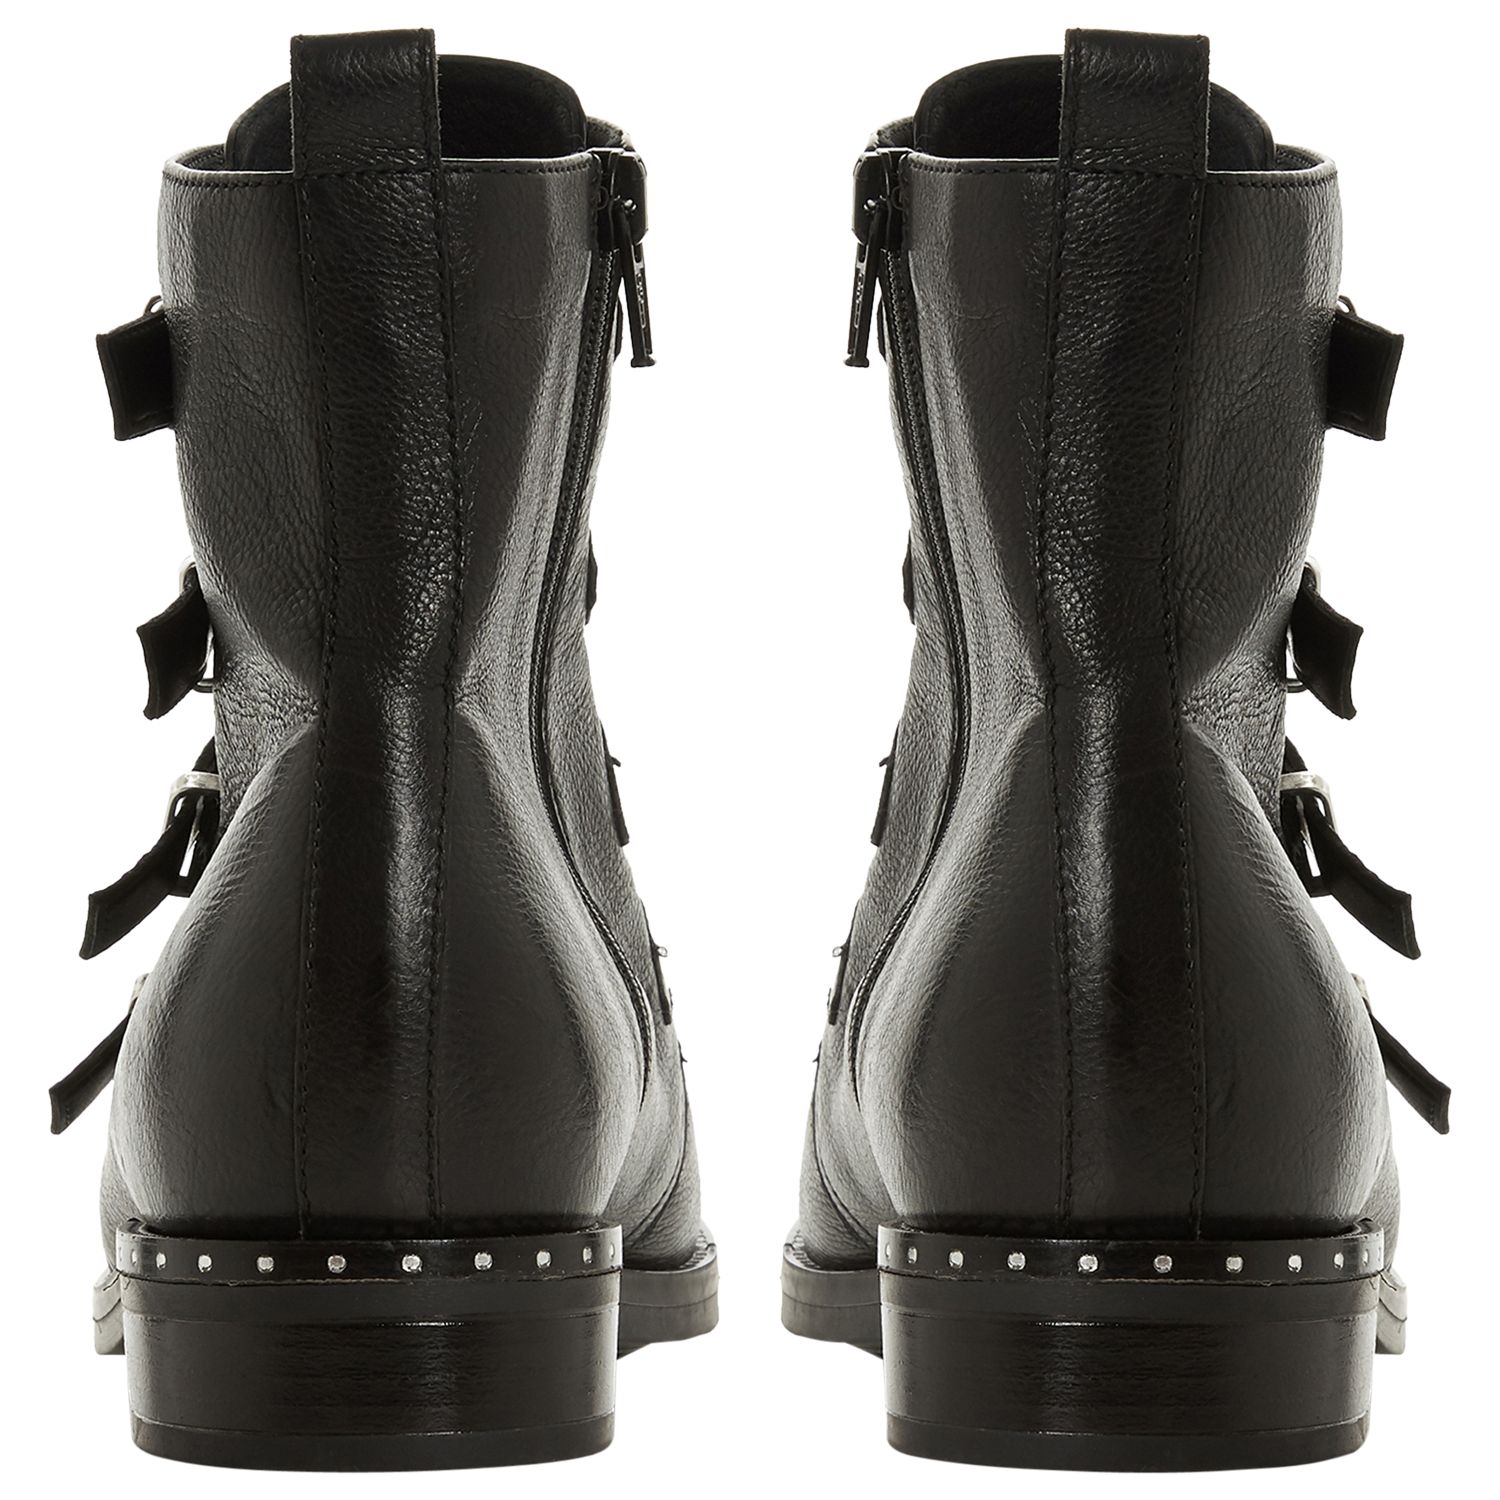 dune pixxel studded ankle boots